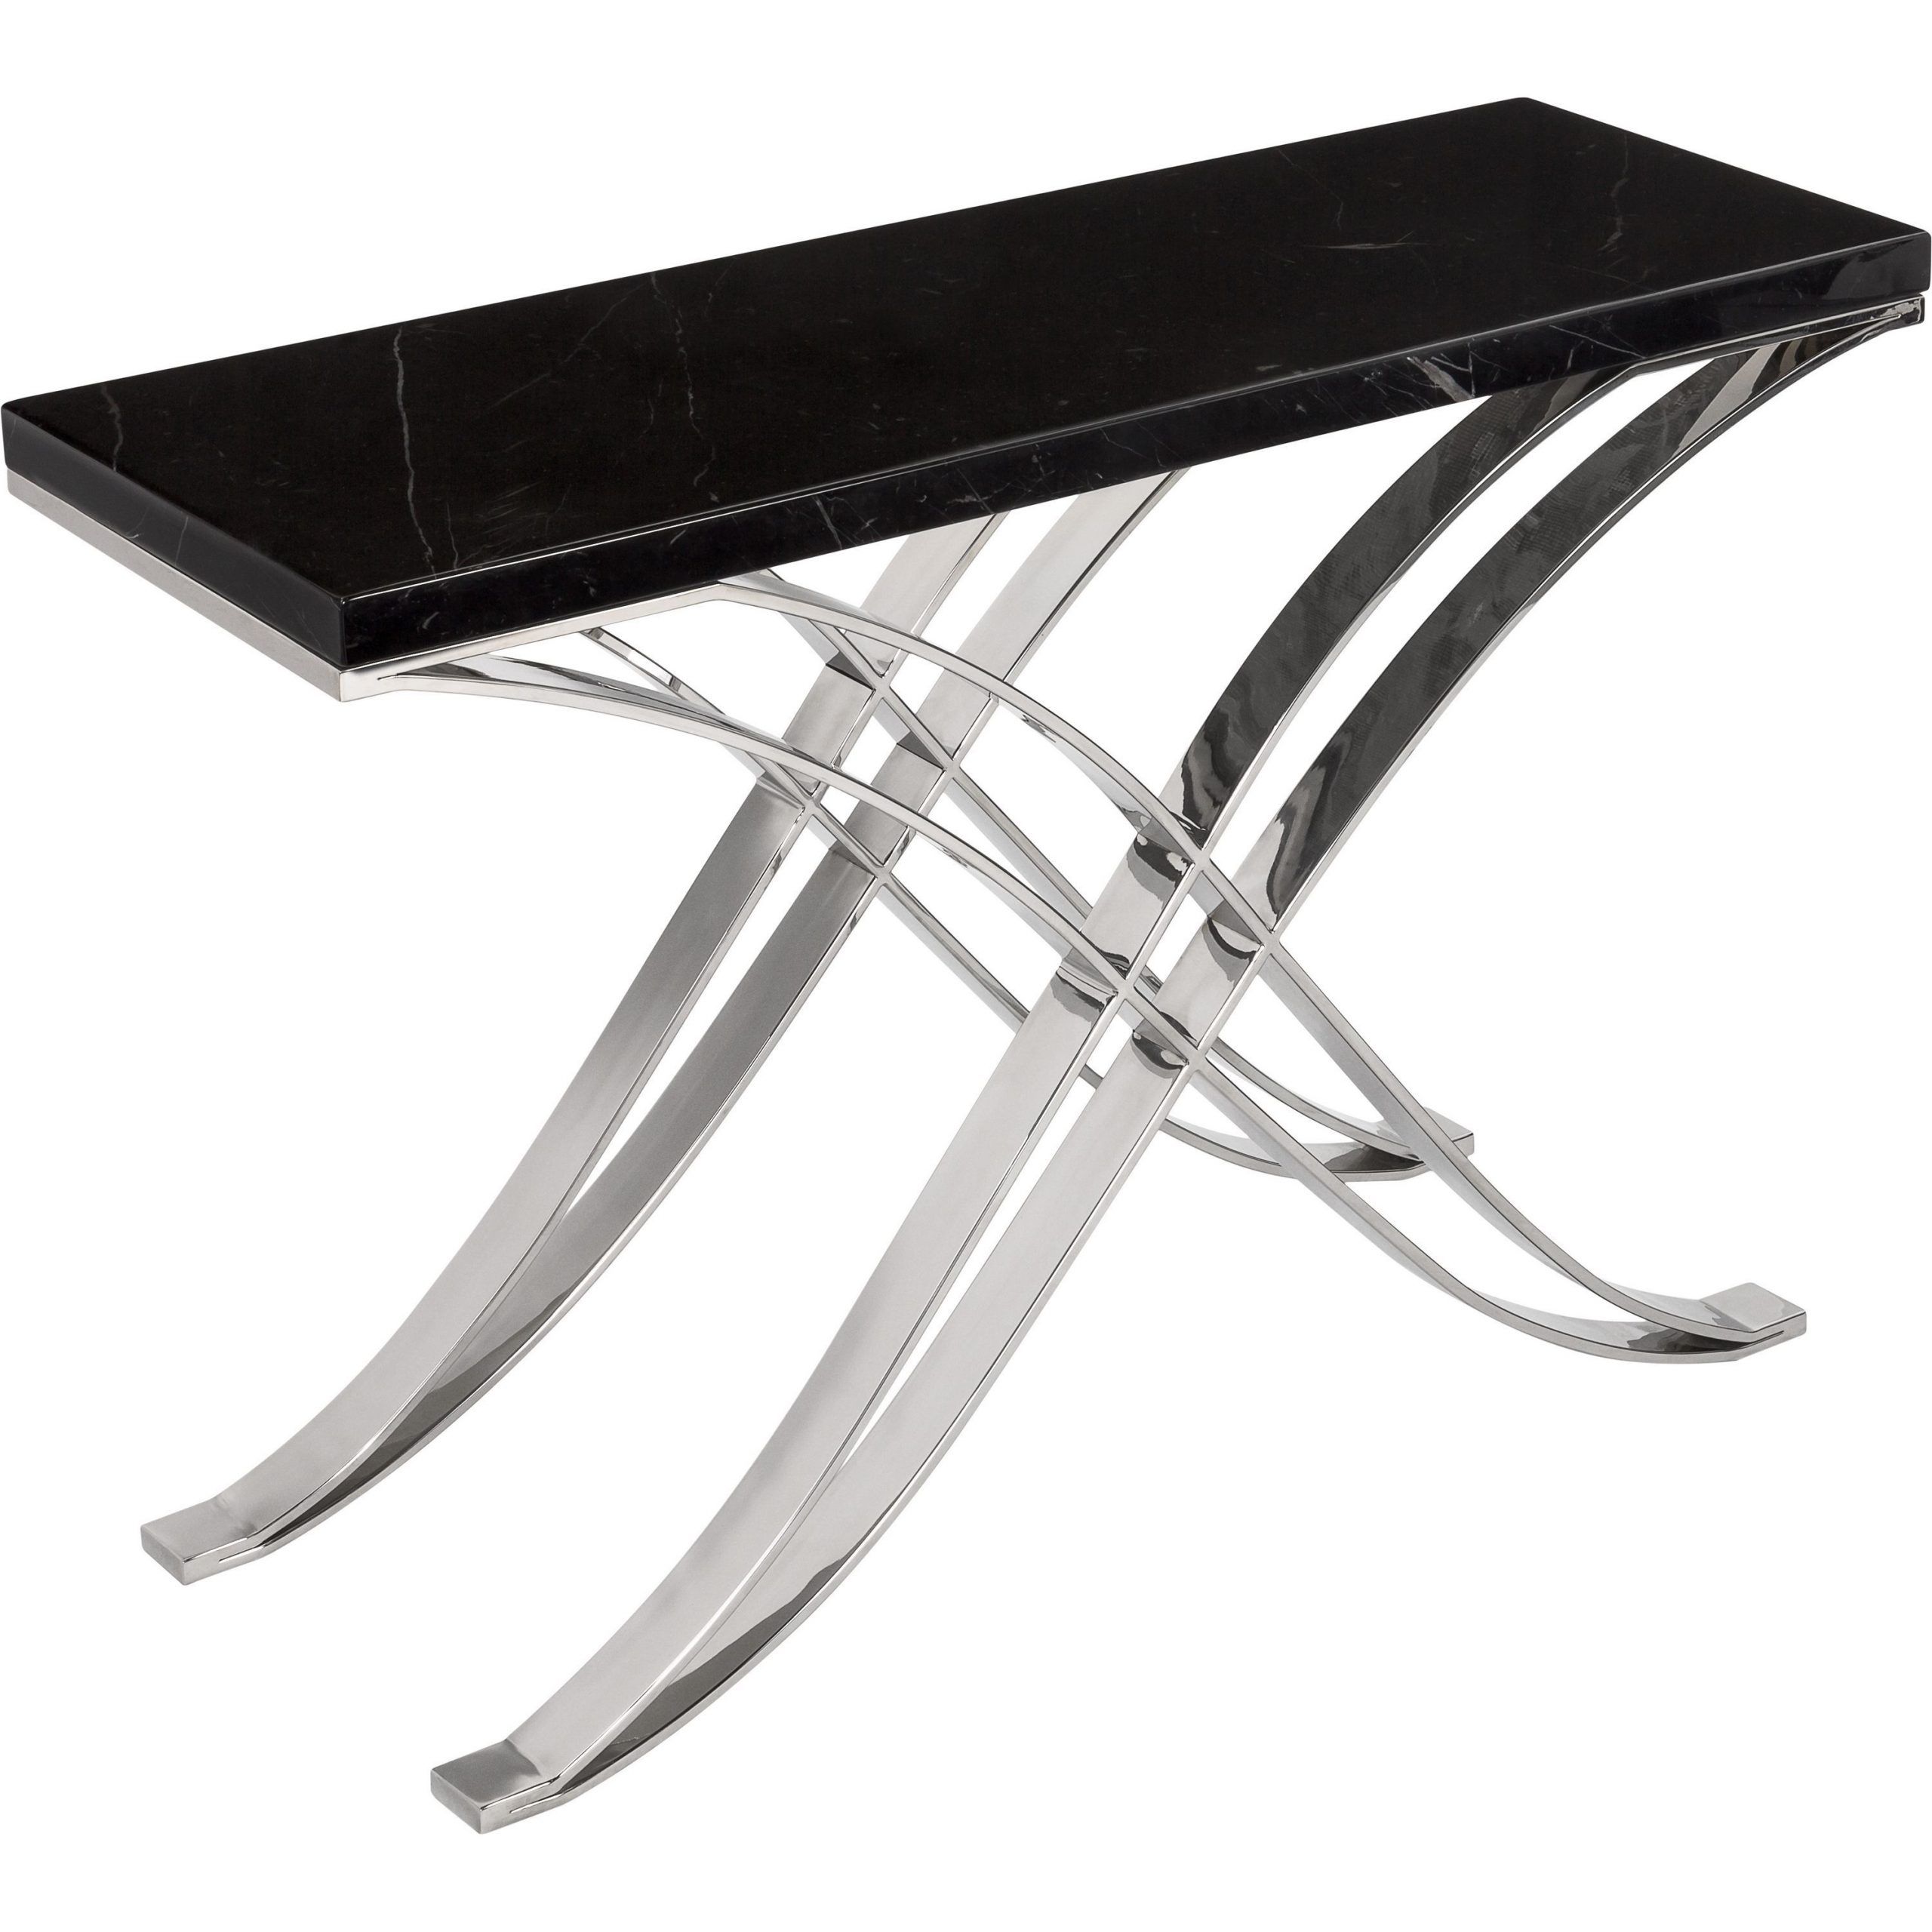 Safavieh Couture High Line Collection Eve Black/ White Marble Stainless Intended For Black Metal And Marble Console Tables (View 12 of 20)